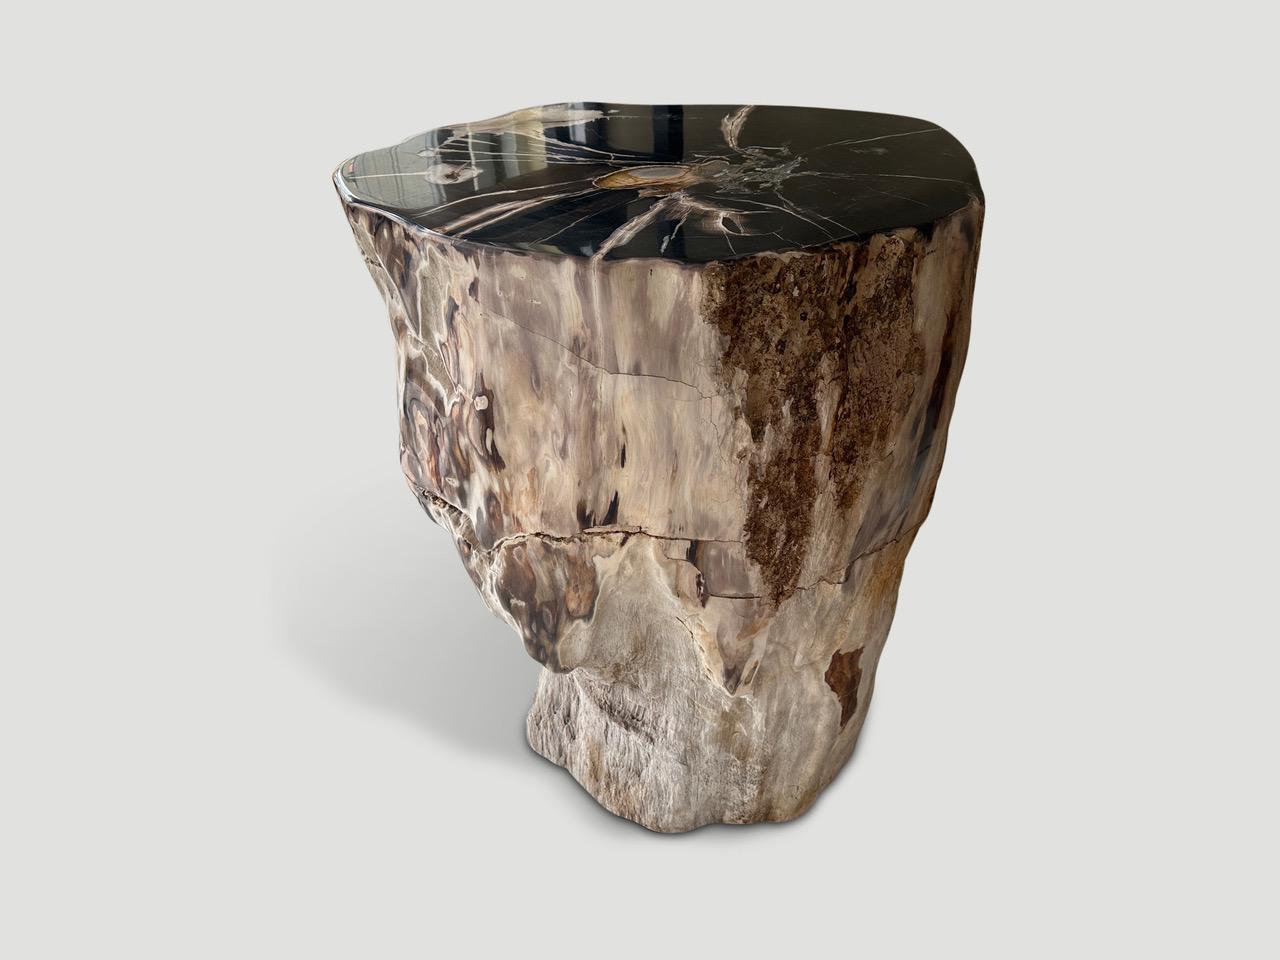 Beautiful contrasting tones and markings on this impressive high quality petrified wood side table or pedestal. It’s fascinating how Mother Nature produces these exquisite 40 million year old petrified teak logs with such contrasting colors and